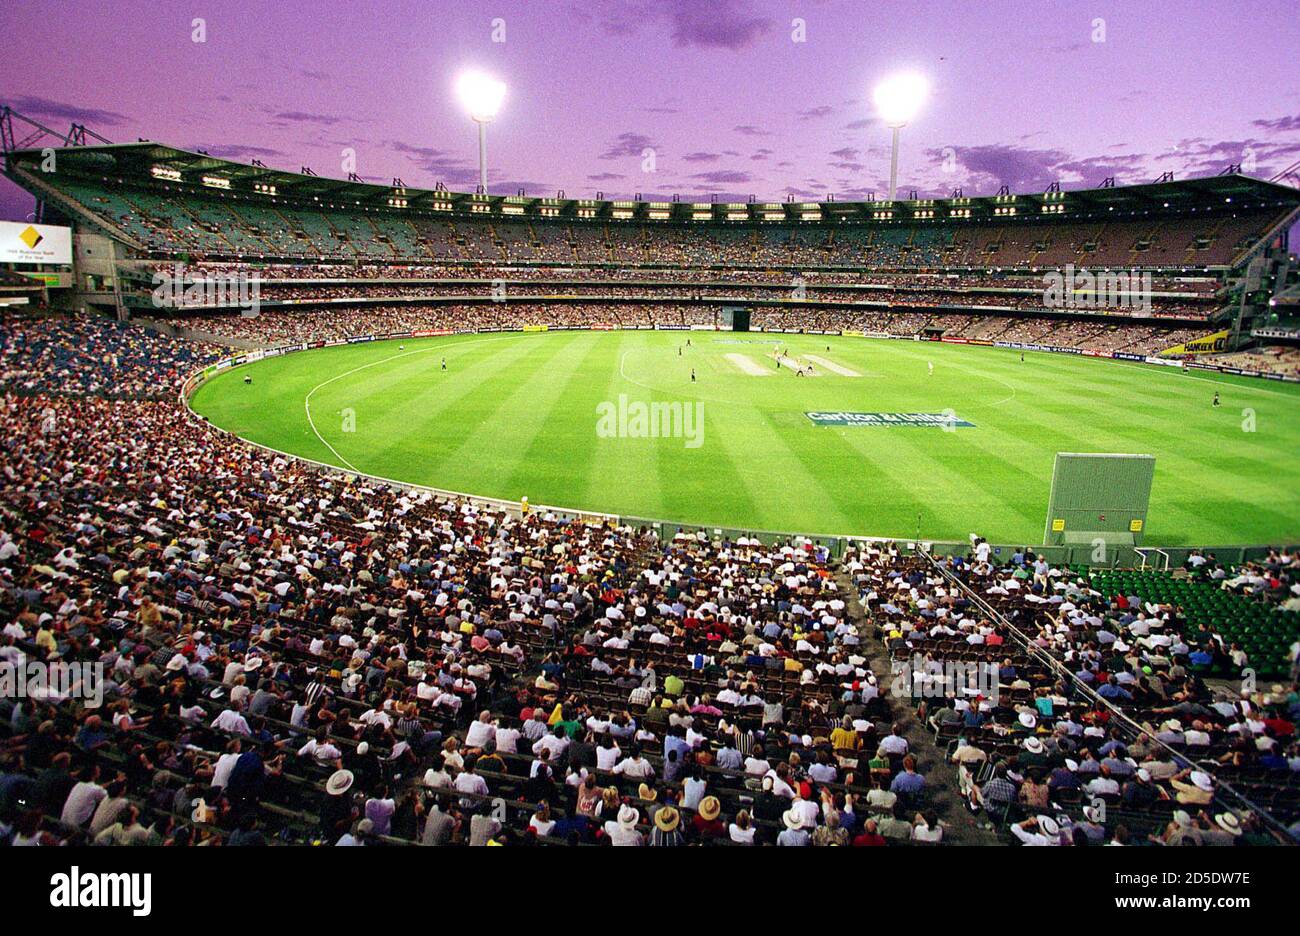 Spectators At The Melbourne Cricket Ground Mcg Watch A Day Night Cricket Match Under Lights With The Stadium S Southern Stand In The Background The Mcg Will Be A Venue For Soccer Matches For